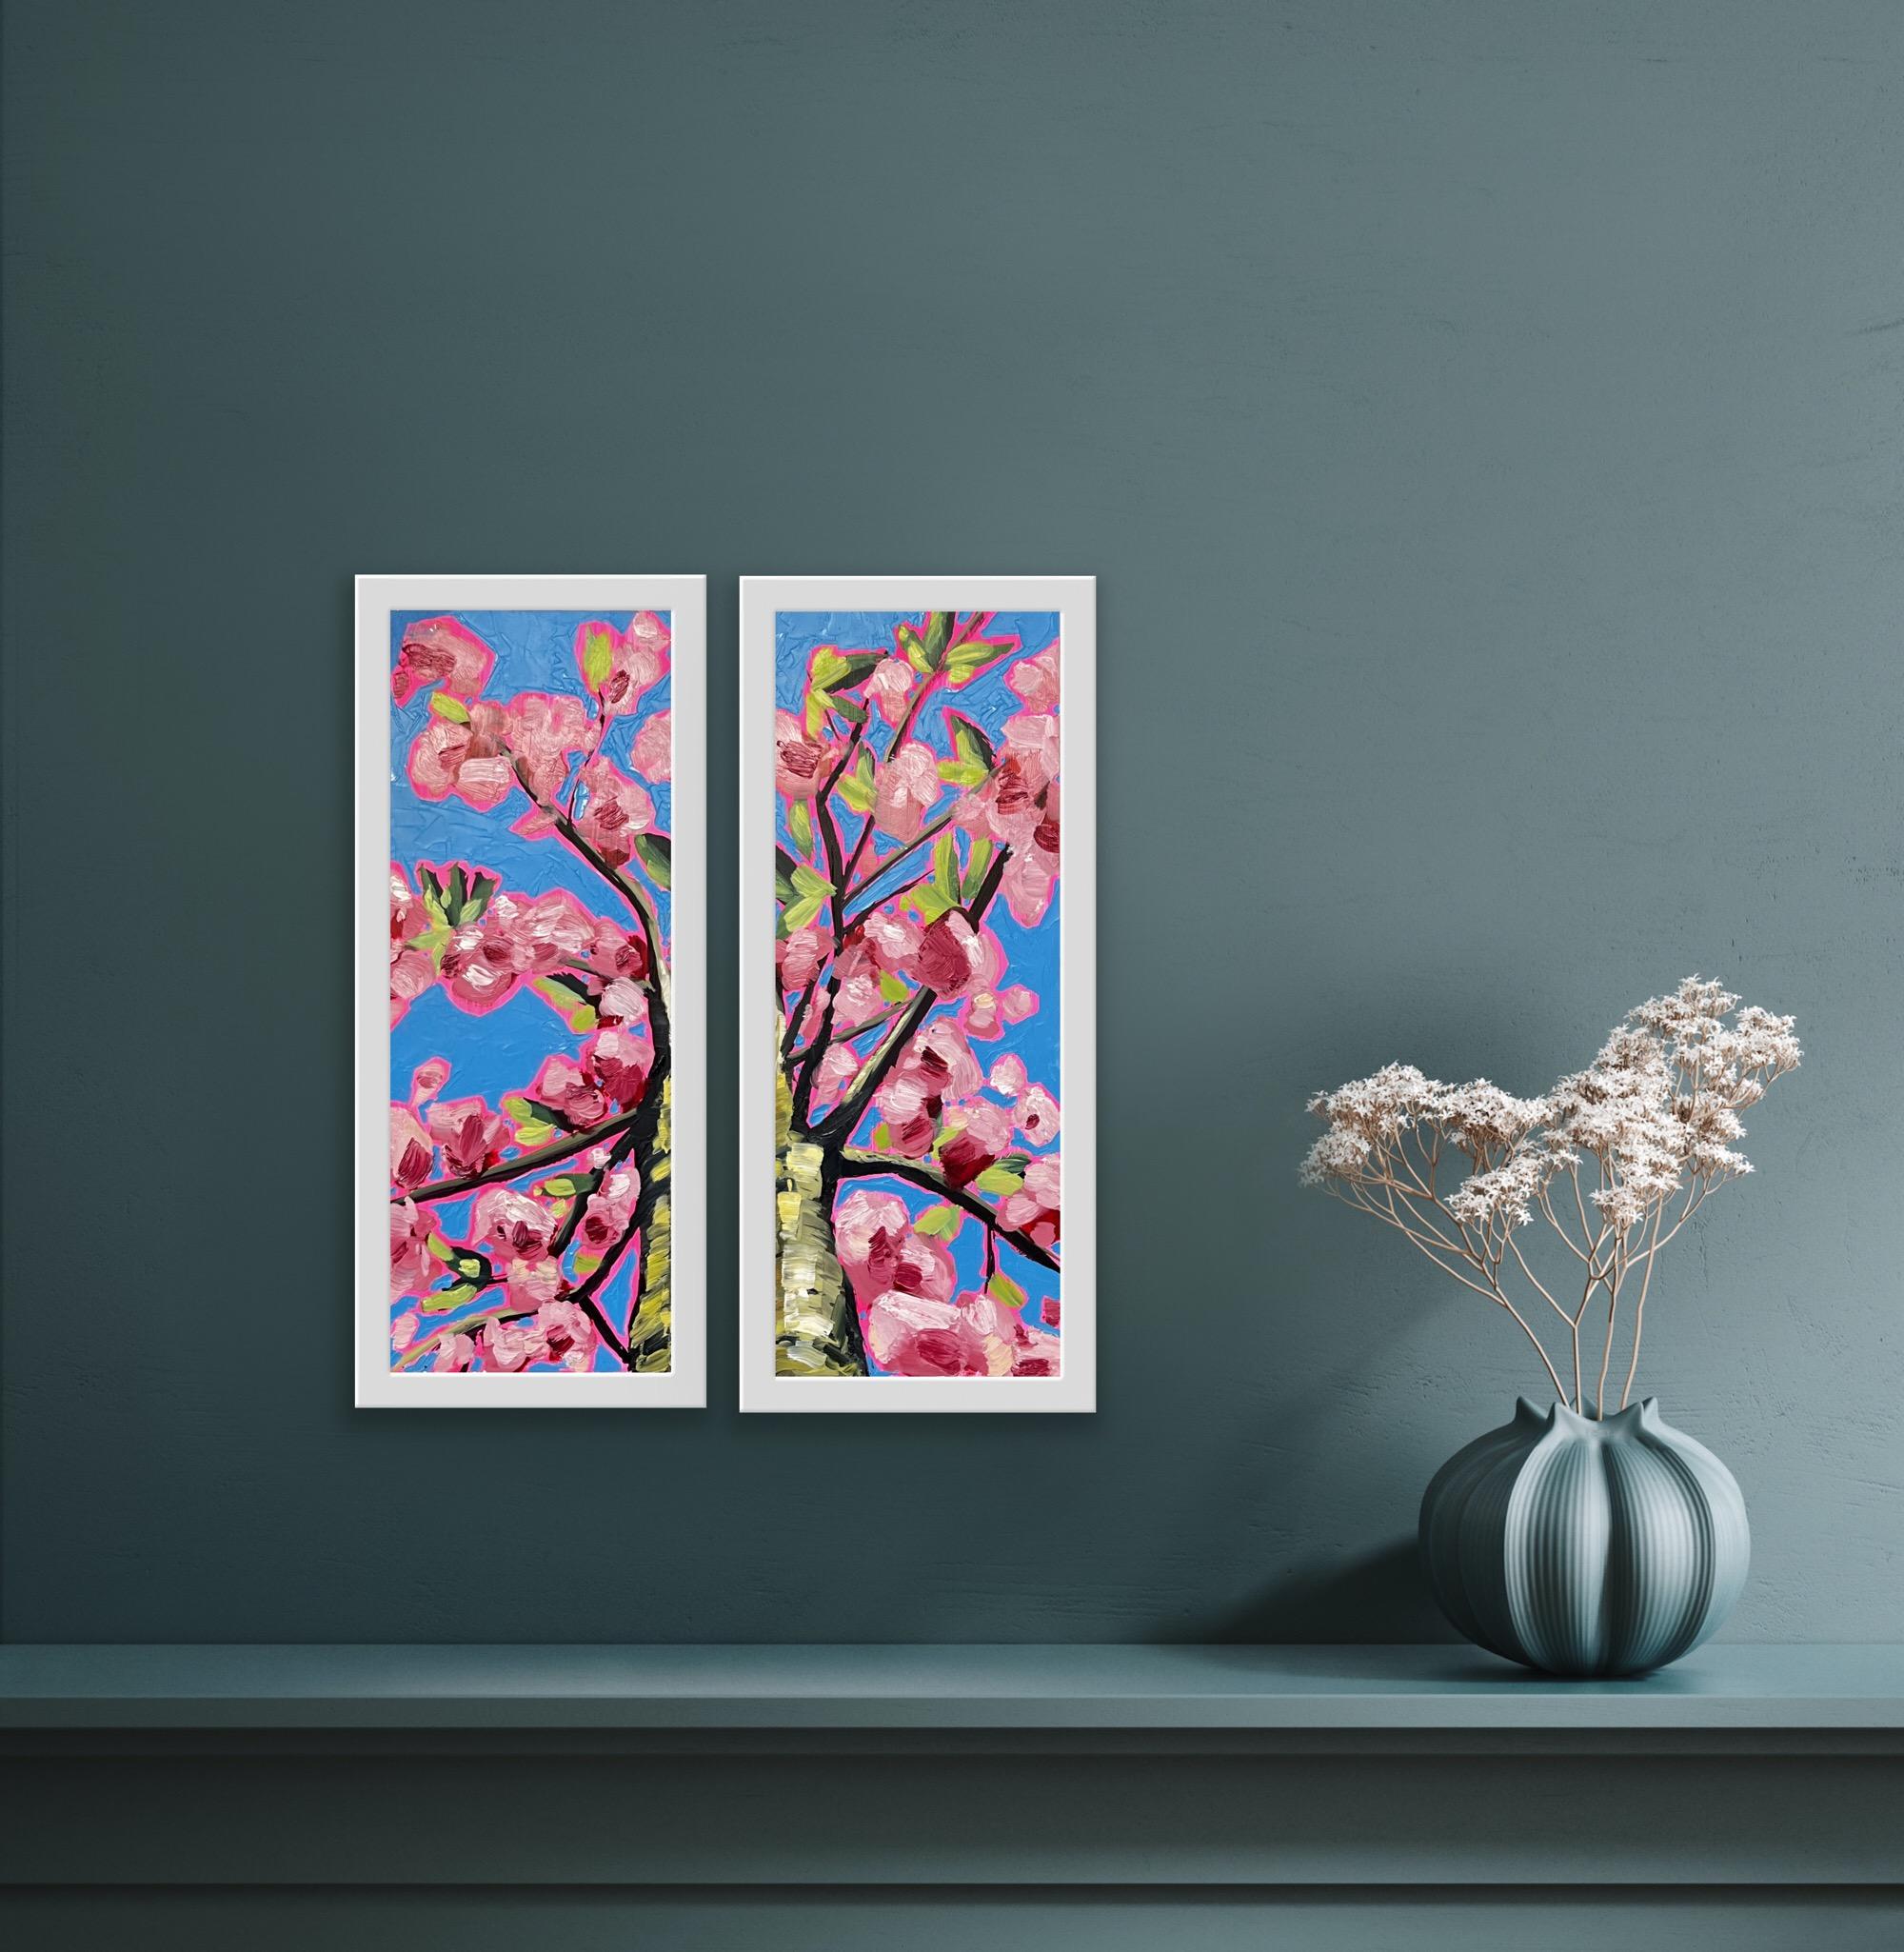 Looking Up Through Pink Blossom Diptych by Emily Finch [2021]

original
Oil Paint on Dibond
Image size: H:40 cm x W:30 cm
Complete Size of Unframed Work: H:40 cm x W:30 cm x D:0.2cm
Sold Unframed
Please note that insitu images are purely an